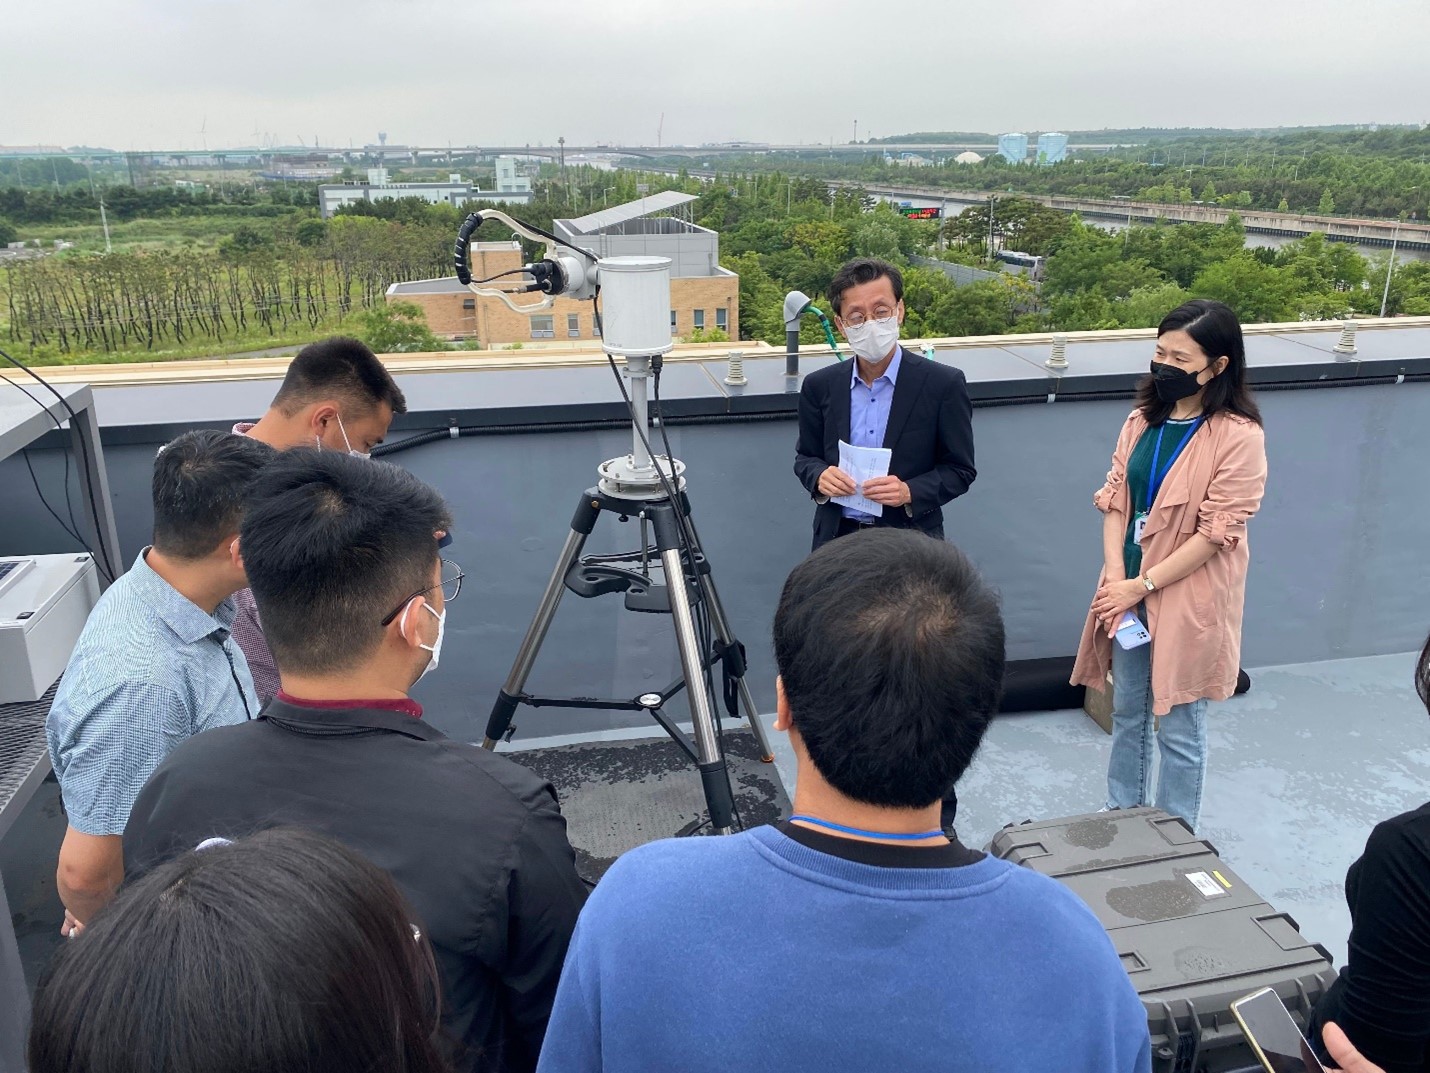 Photo 2: Pandora instrument installation and operation demonstration on the roof top of the Environmental Satellite Center in Incheon, Republic of Korea.